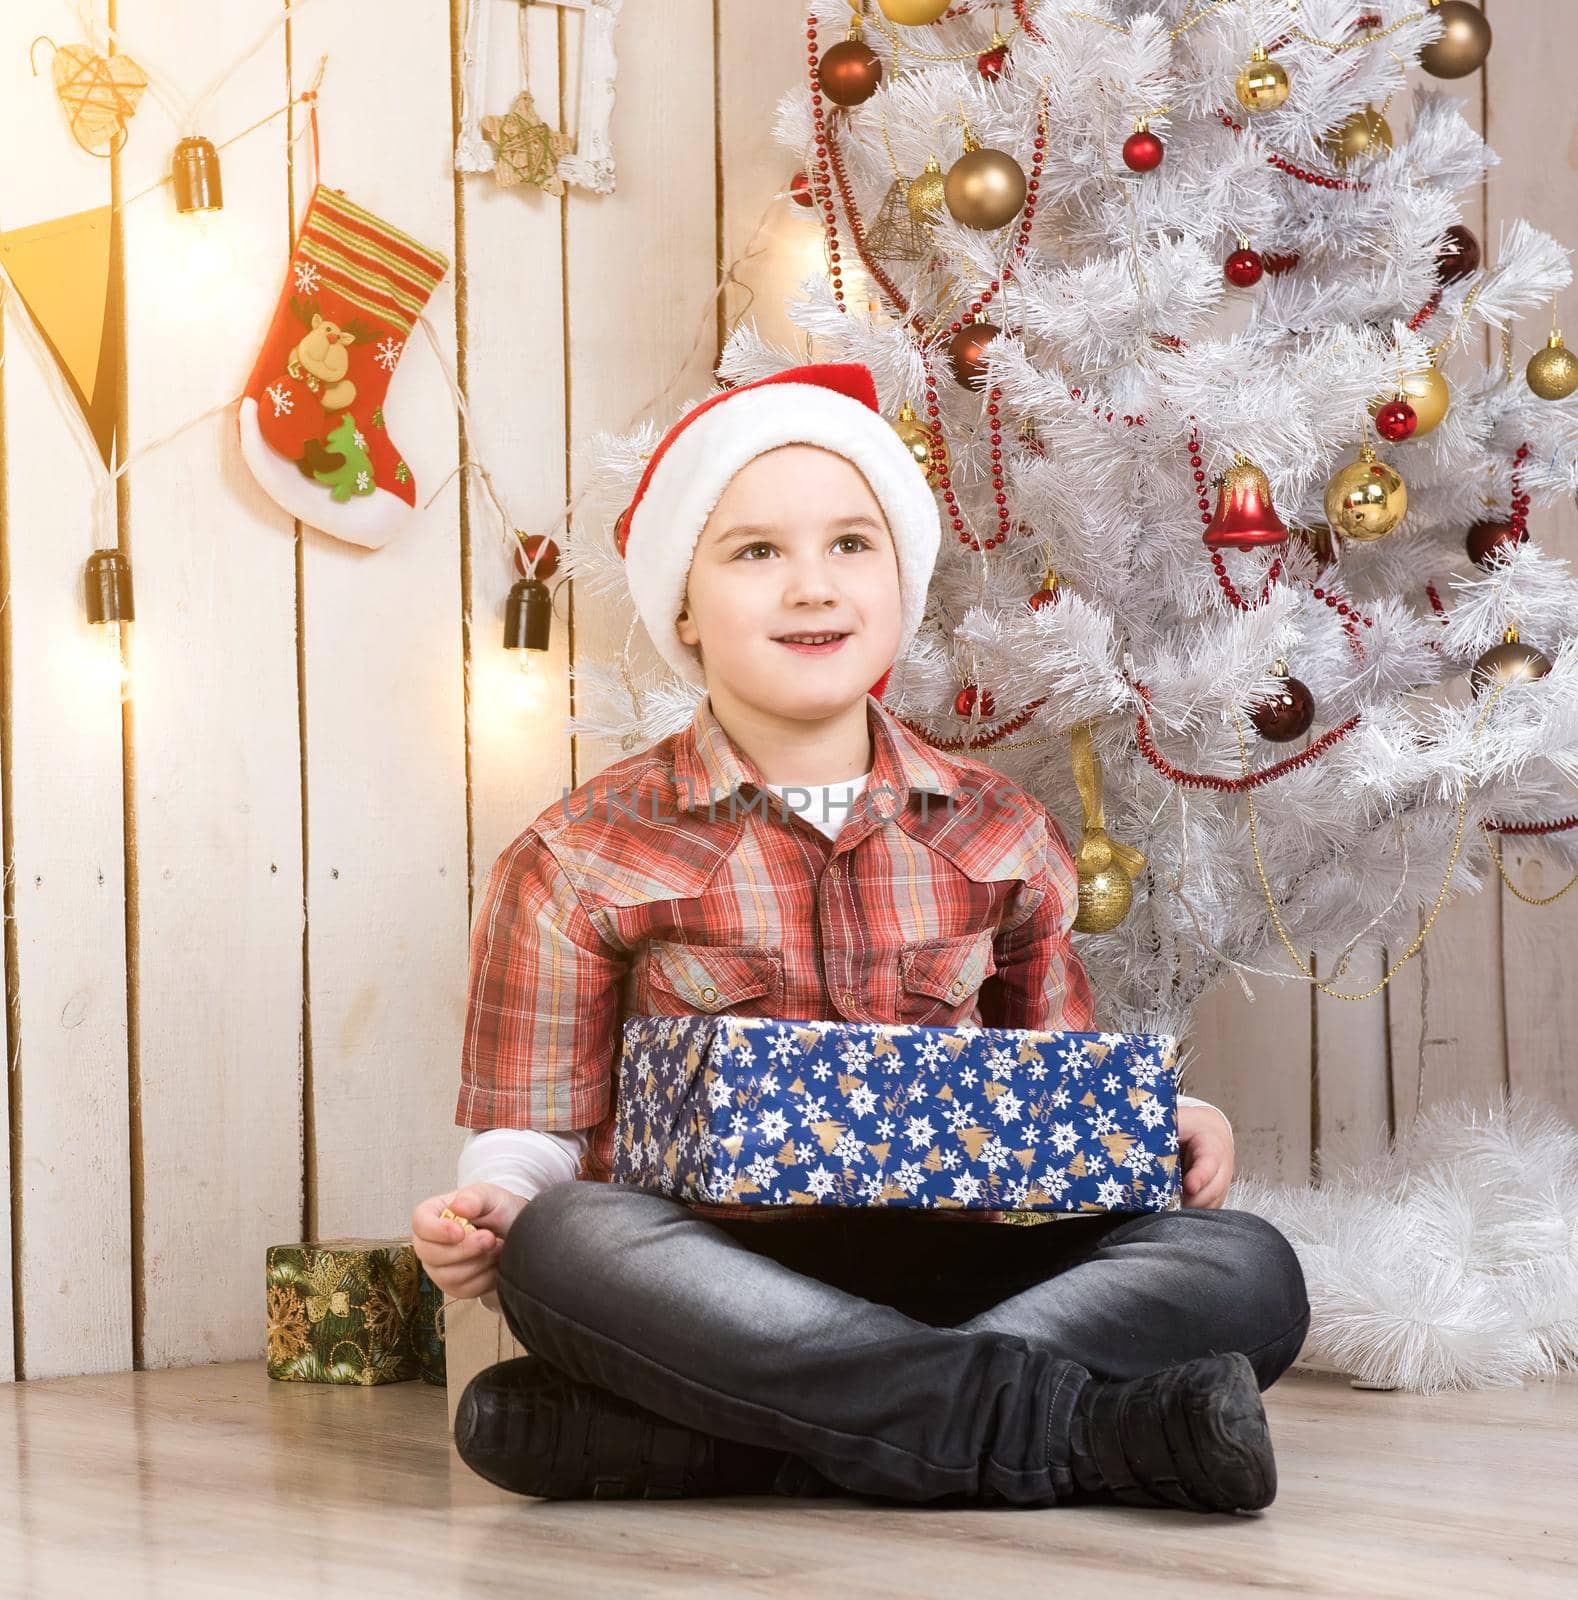 little boy in red hat taking present box near new year tree in decorated room